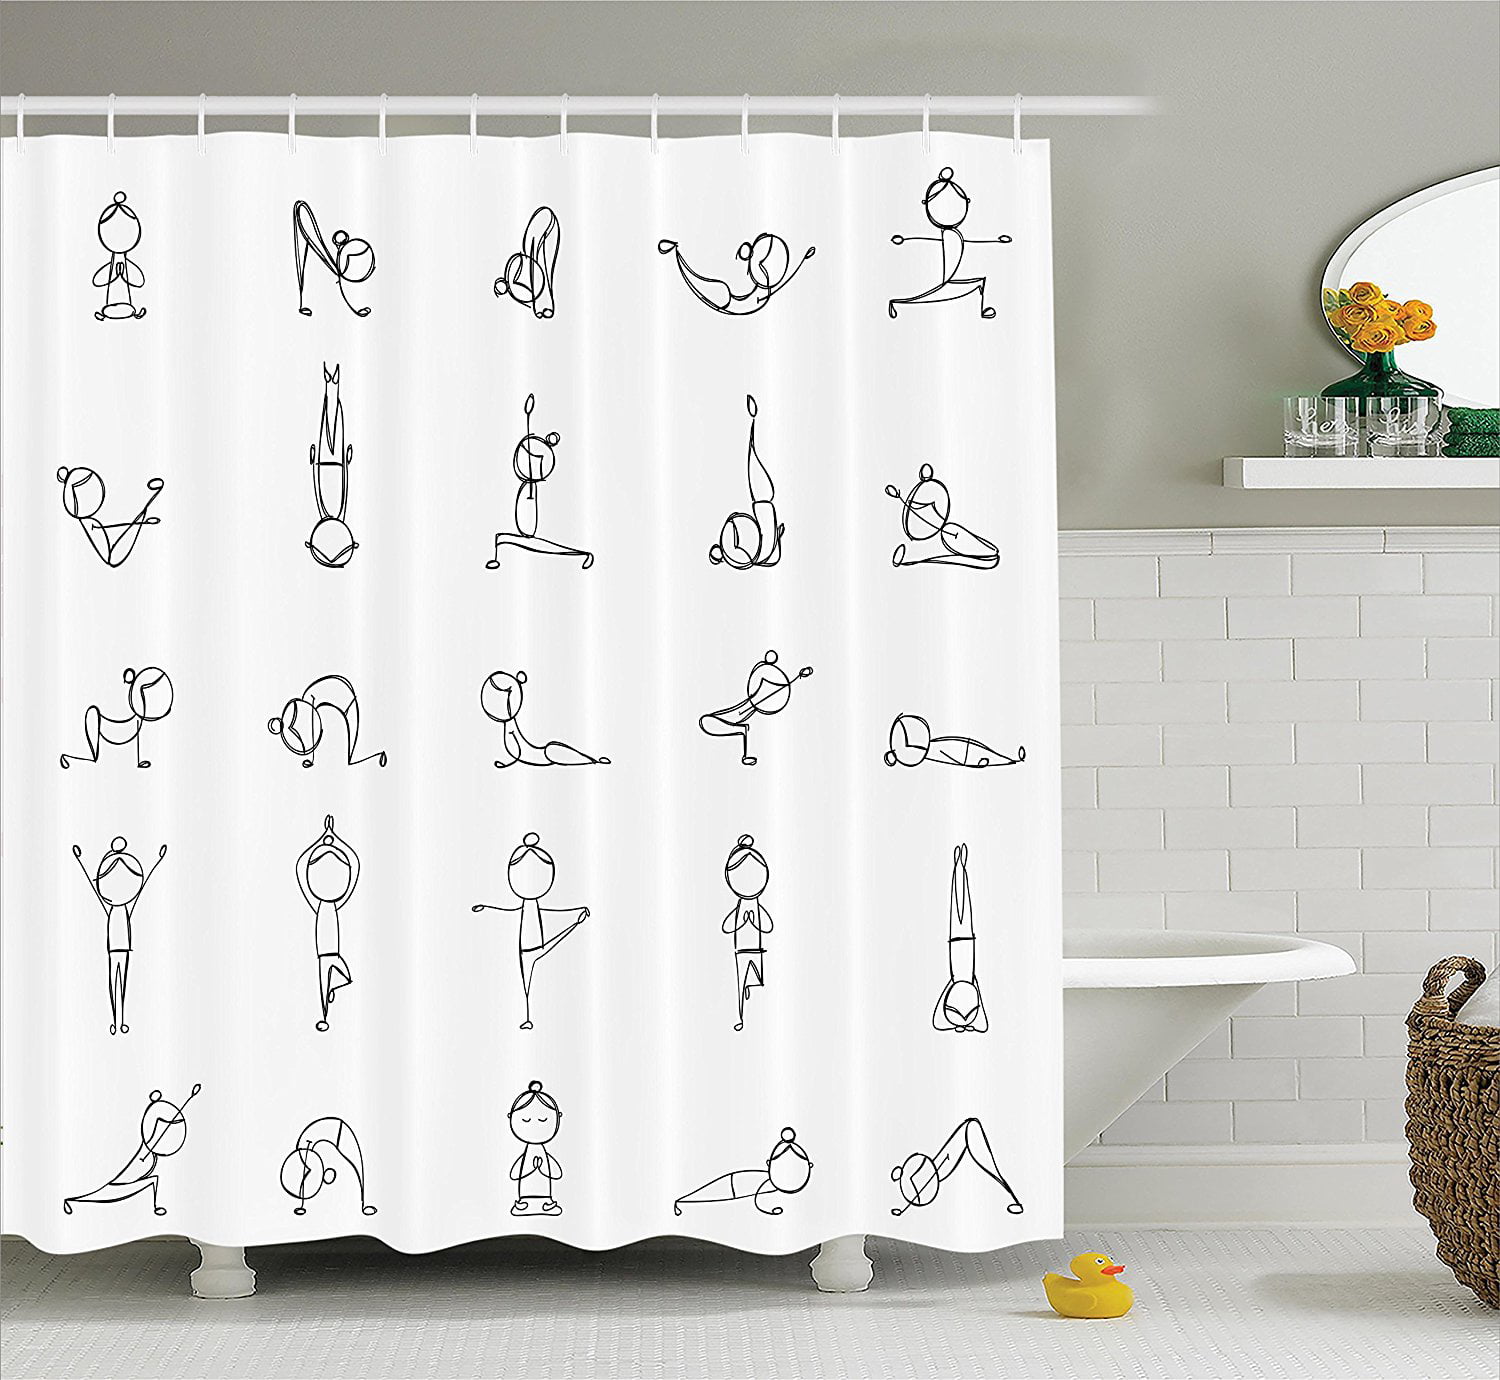 Details about   Lake Outside The Window Shower Curtain Bathroom Decor Fabric & 12hooks 71in 